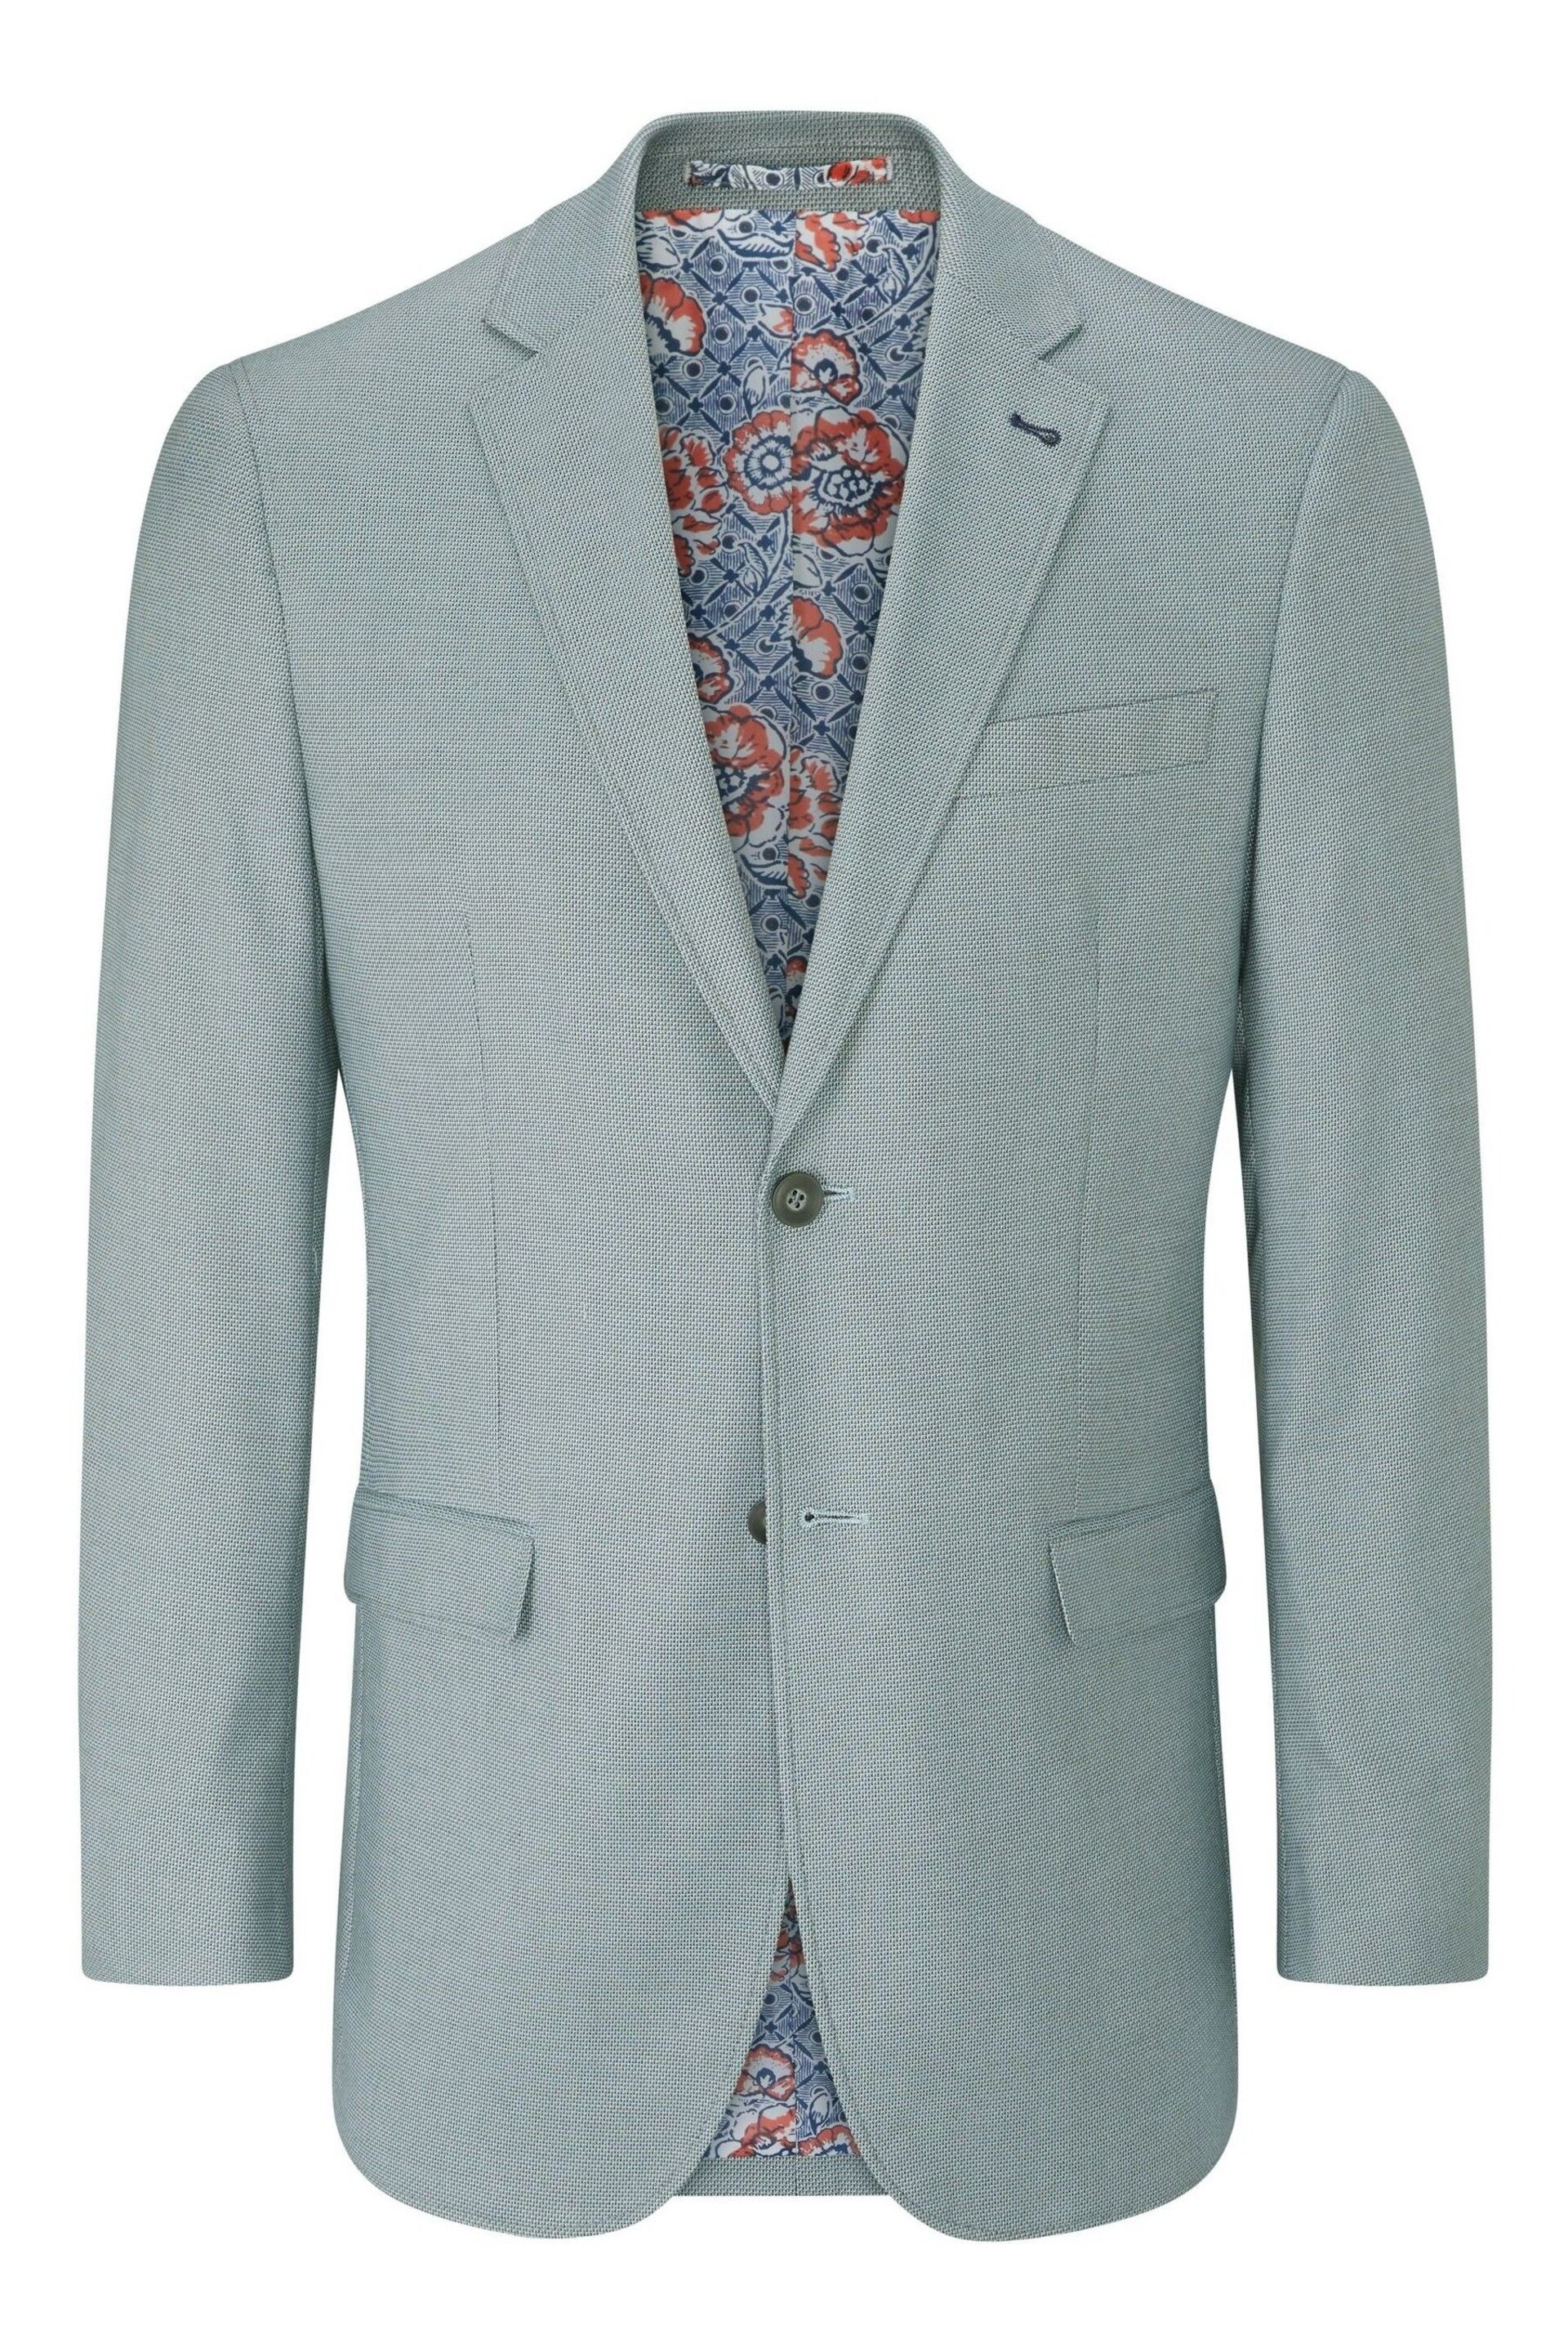 Skopes Tailored Fit Harry Mint Green Jacket - Image 6 of 6